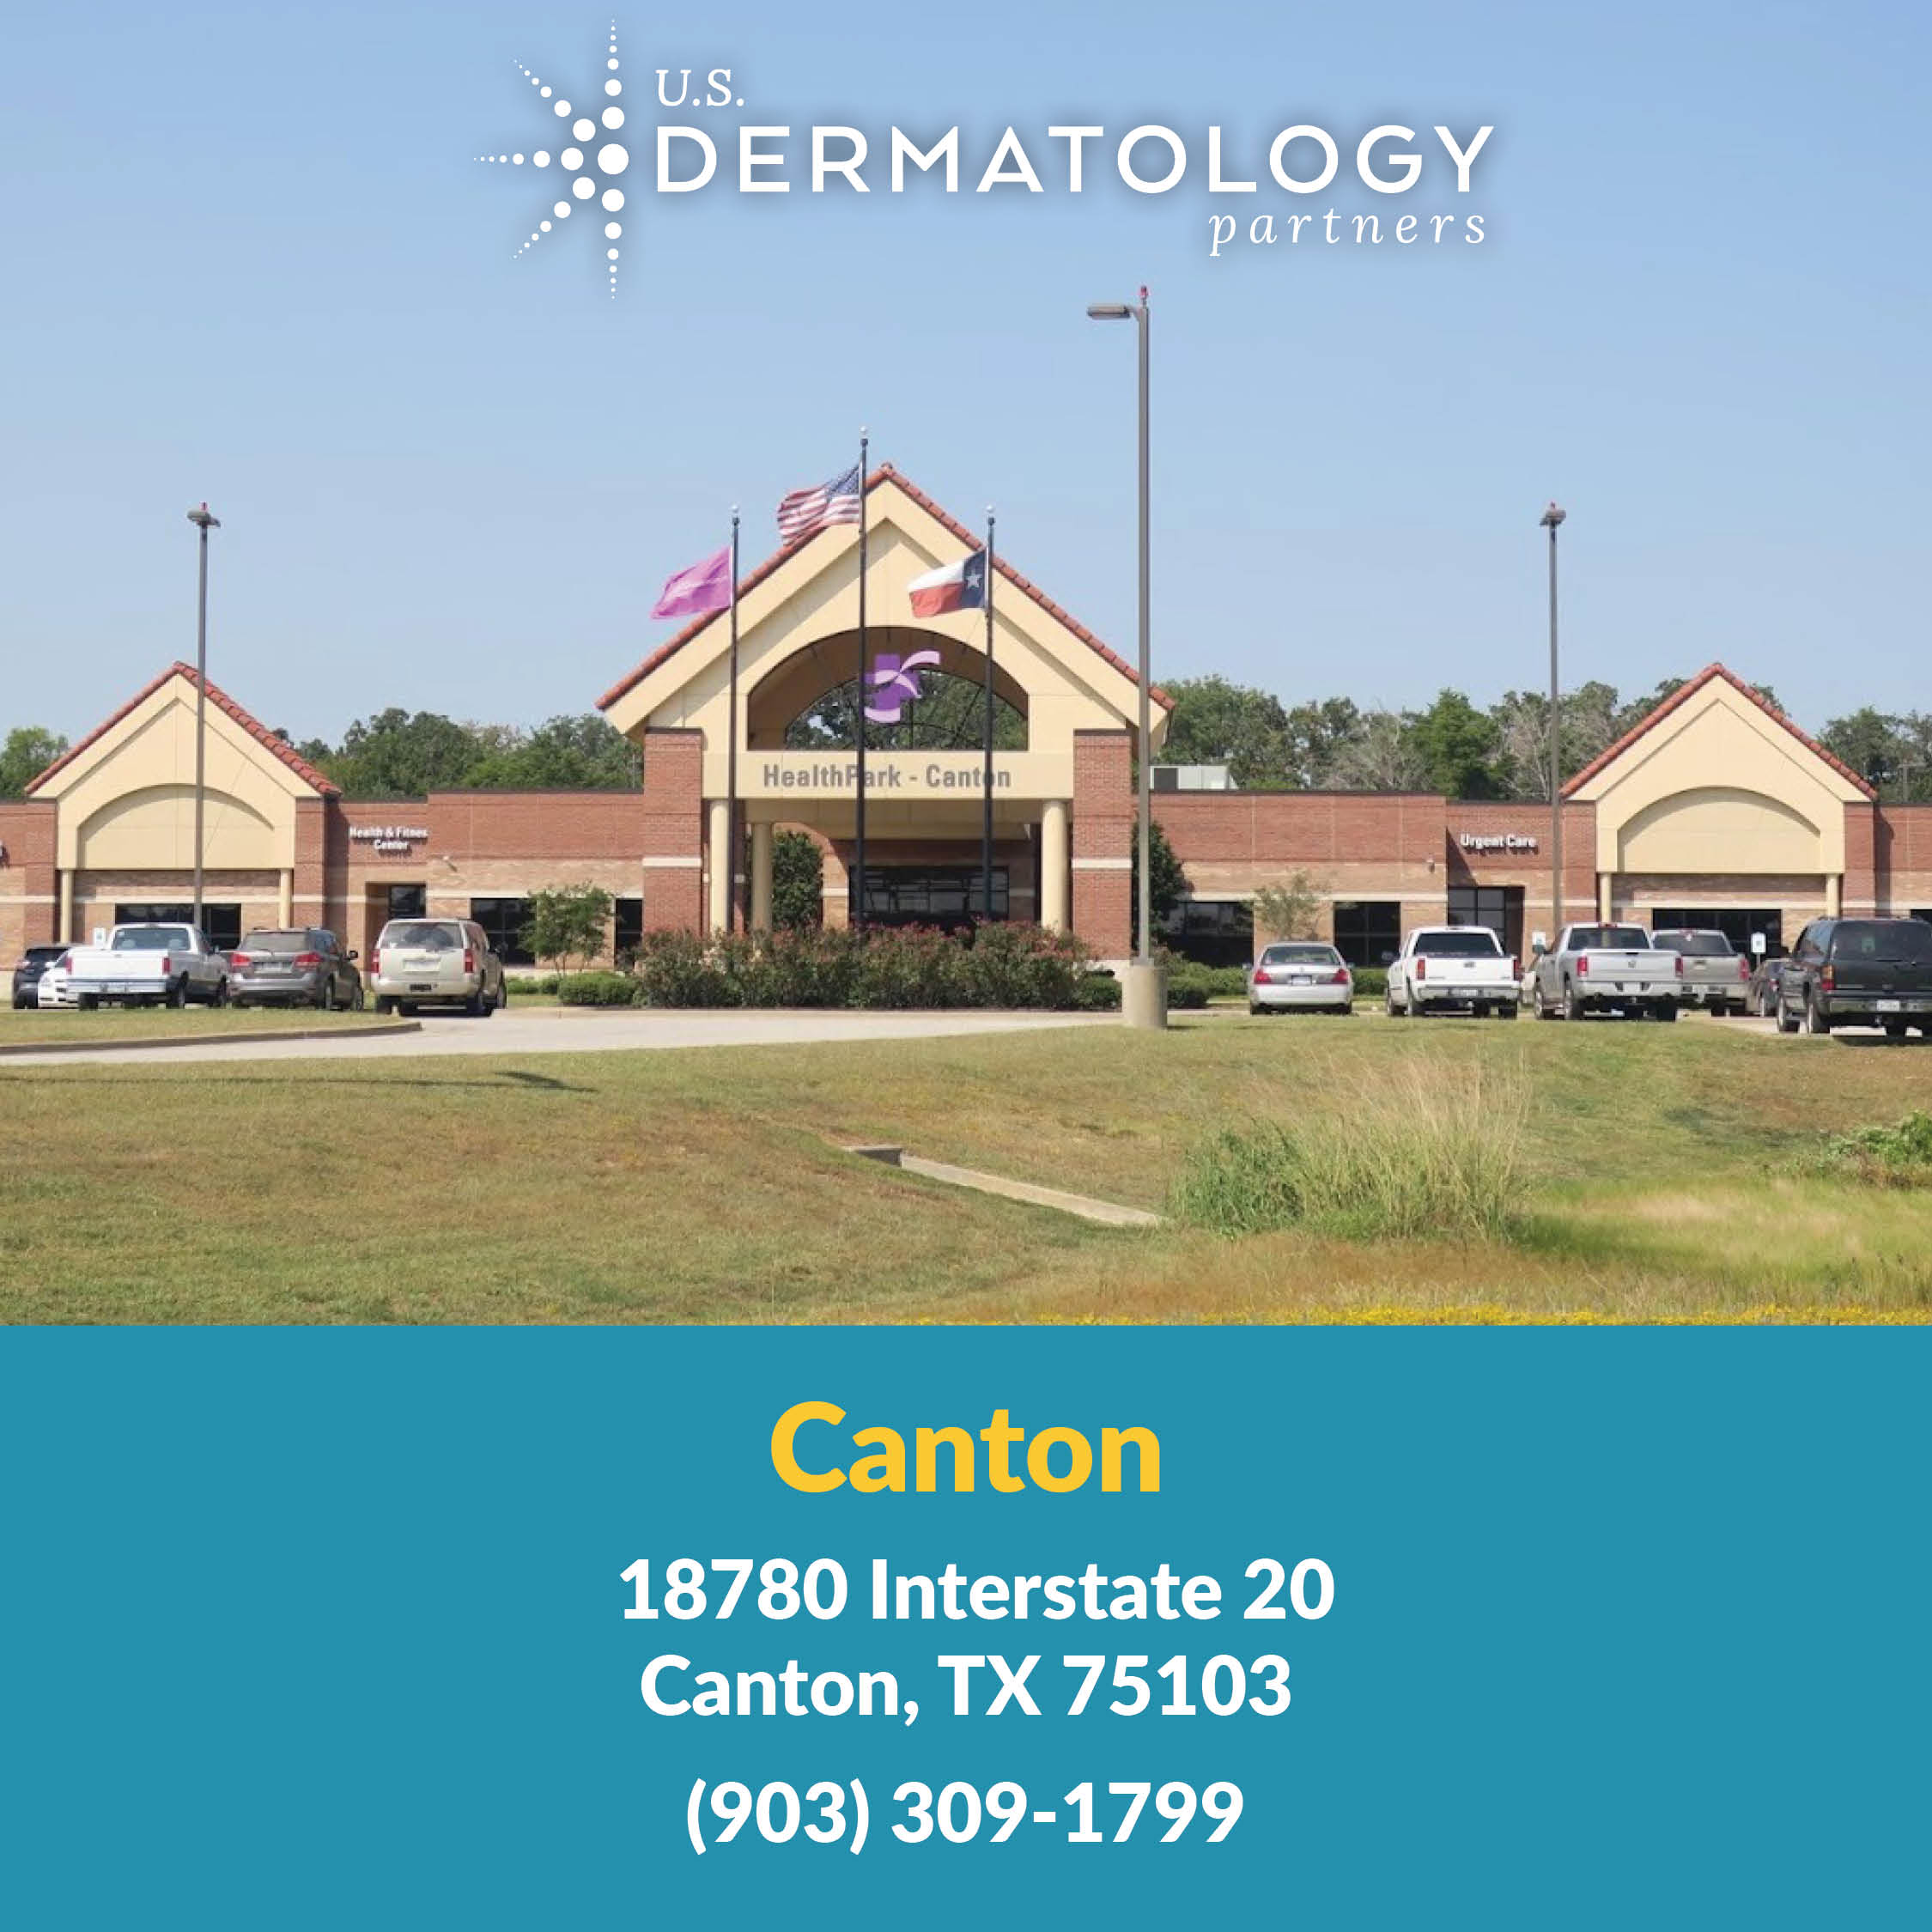 U.S. Dermatology Partners is your specialty dermatologist in Canton, Texas. We offer treatment for acne, eczema, skin cancer, & more.